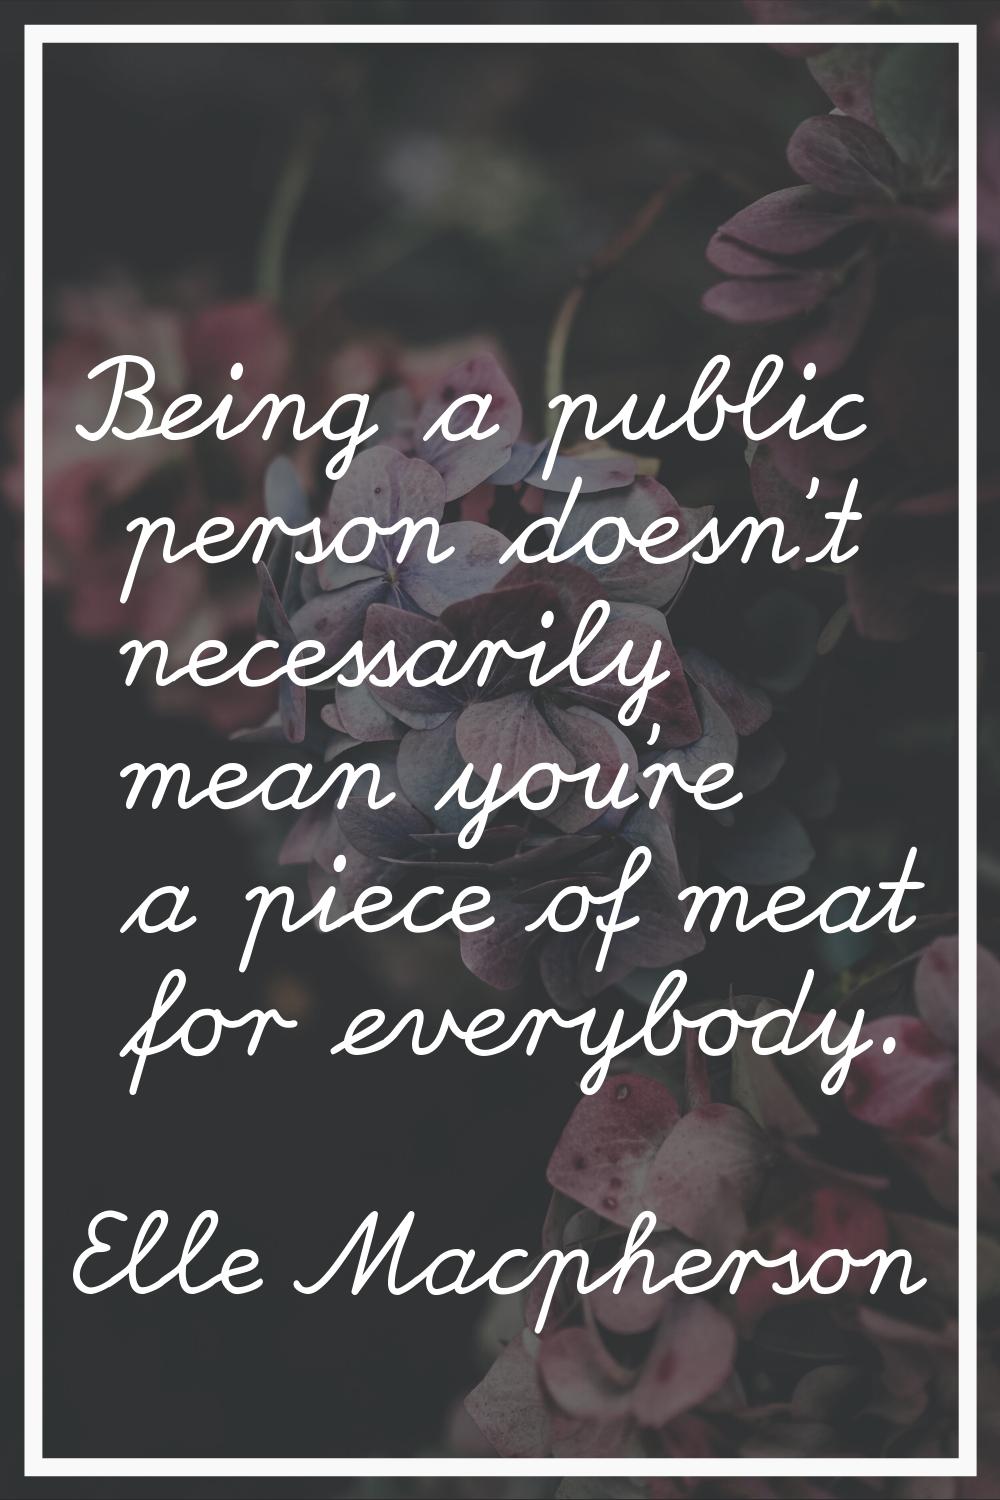 Being a public person doesn't necessarily mean you're a piece of meat for everybody.